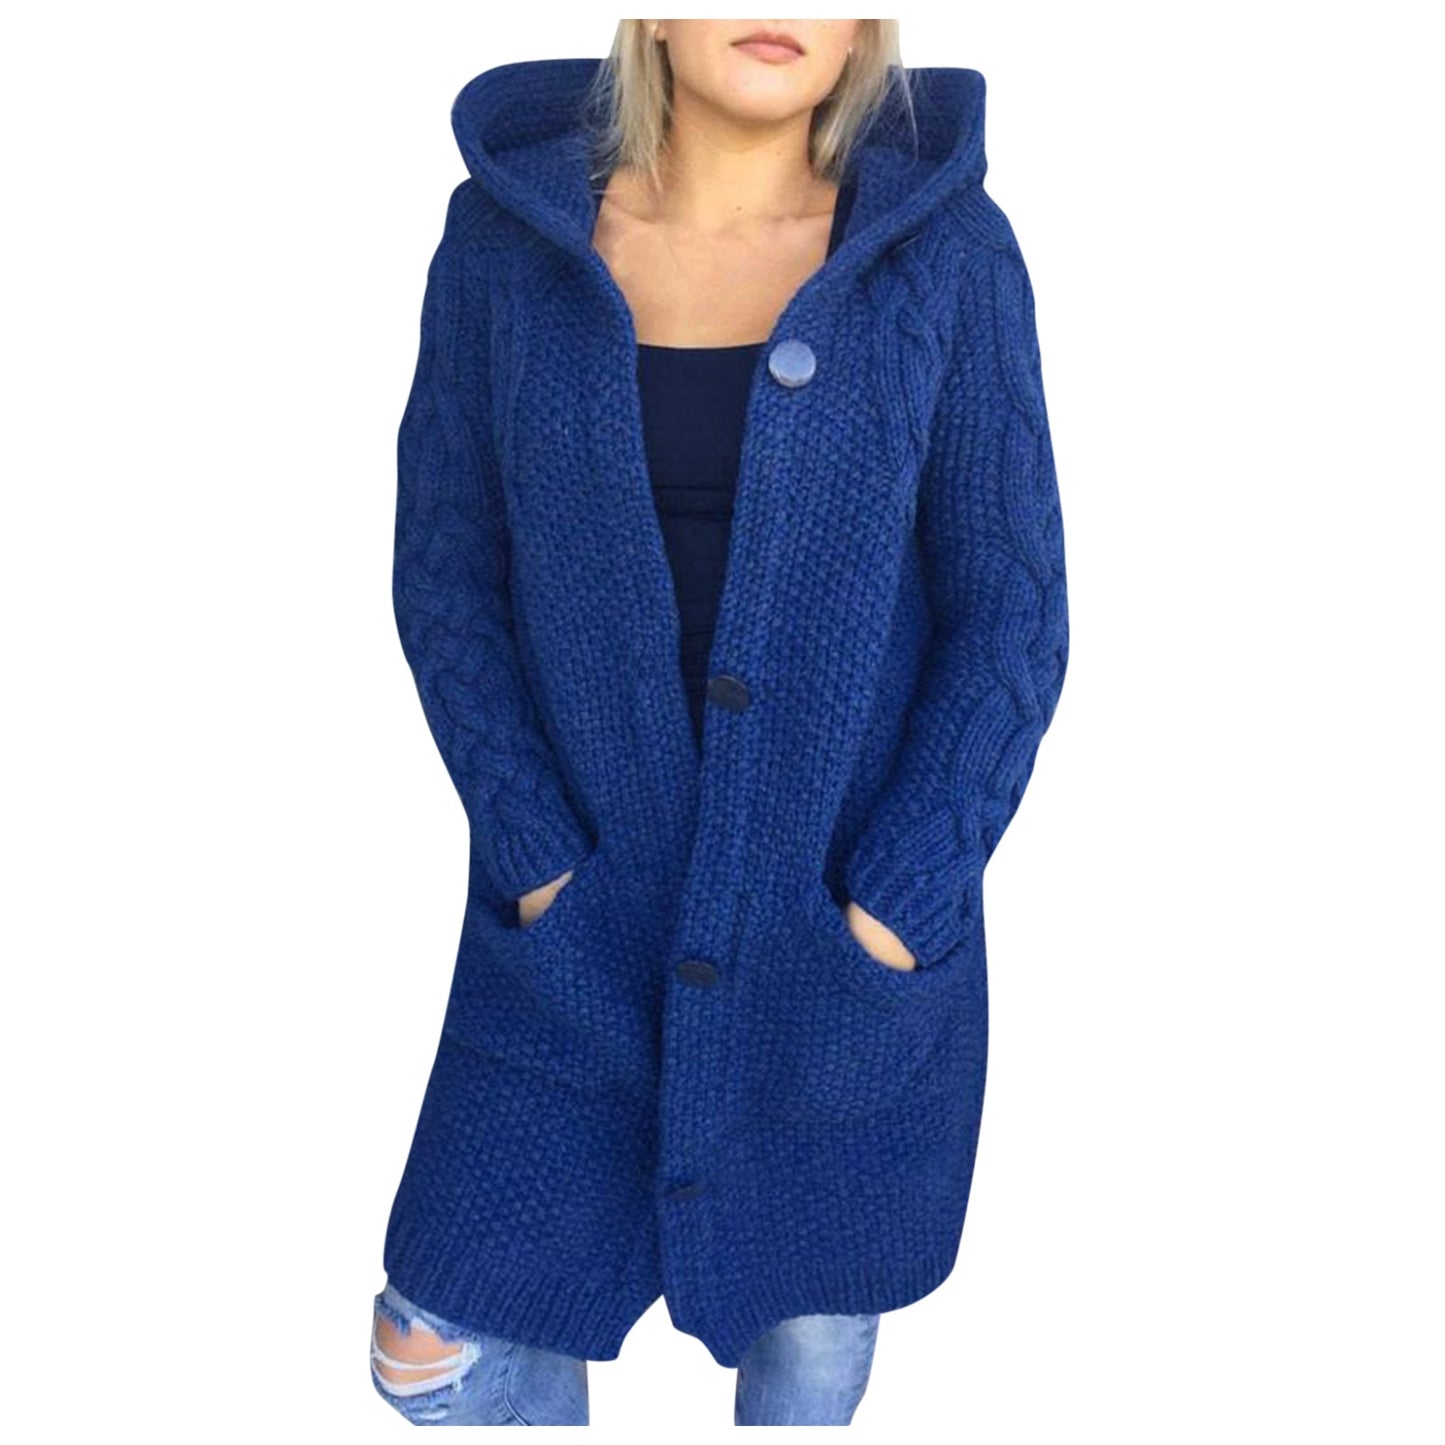 Winter Fashion Long Sweater Women Cardigan Solid Color Knitted Hooded Sweaters Style Thick Open Front Long Overcoat